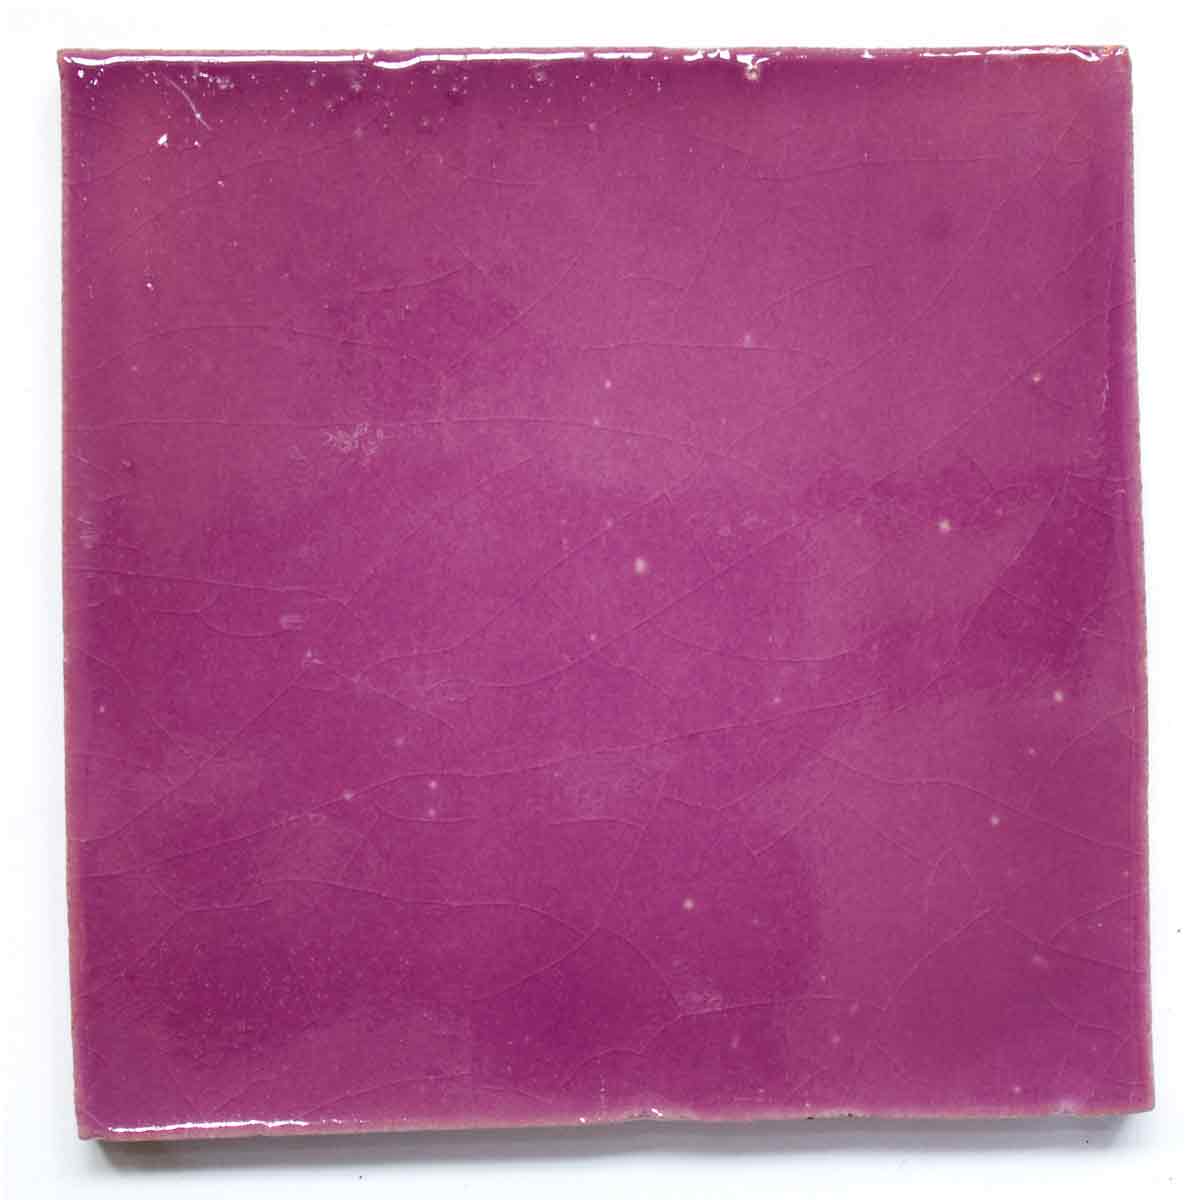  Lilac hand made tile 10.5 x 10.5cm